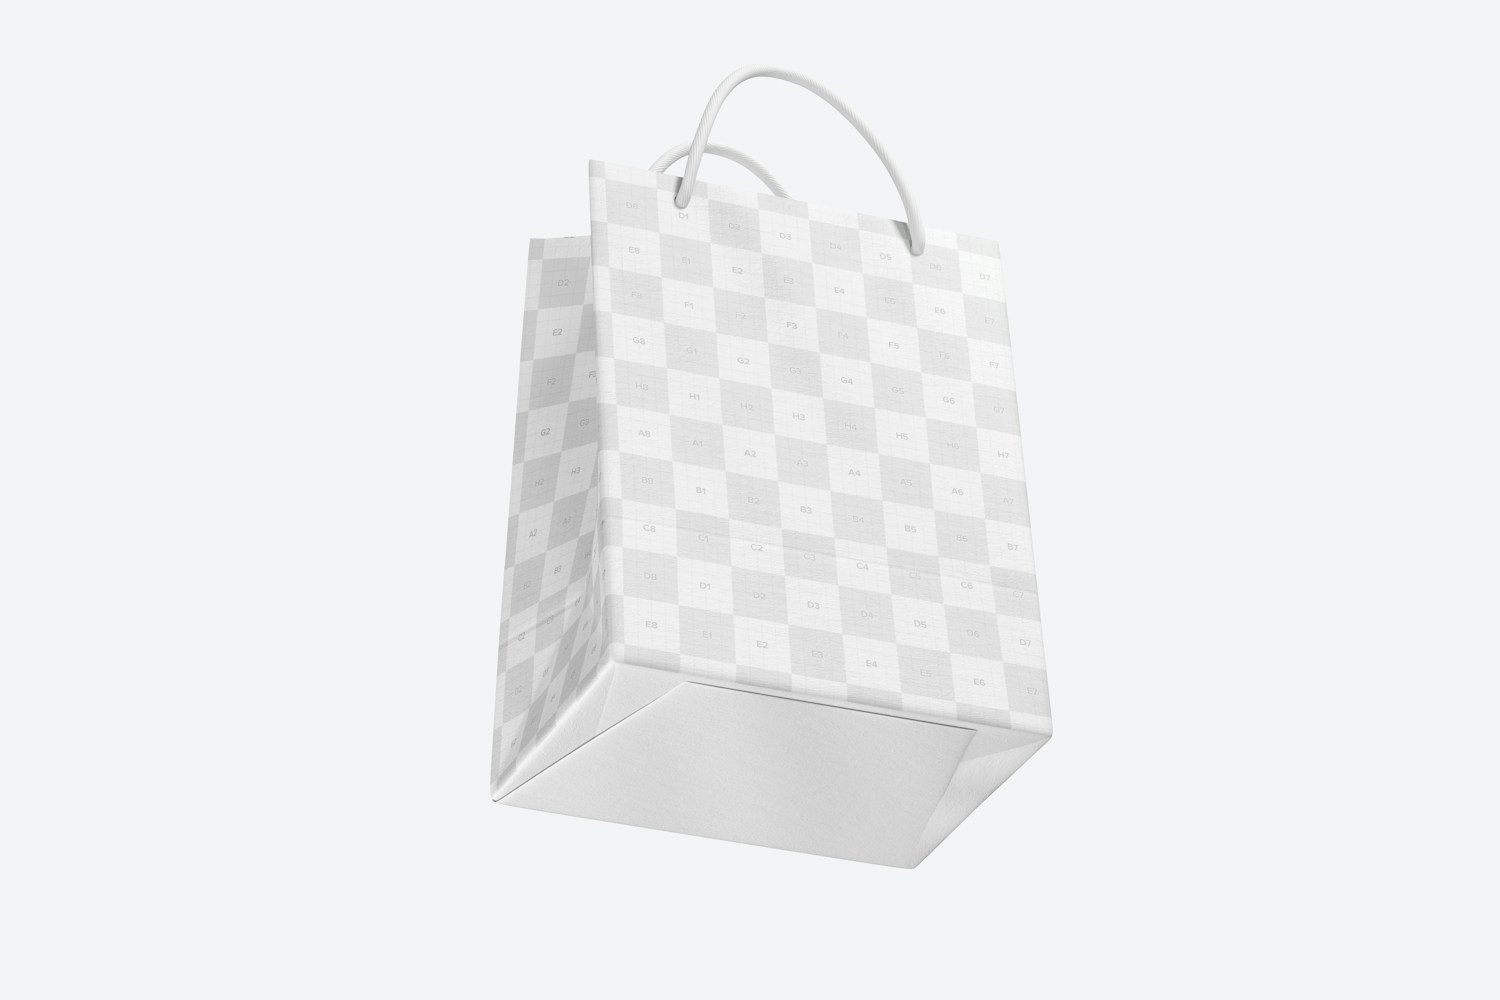 Small Paper Gift Bag With Rope Handle Mockup, Floating